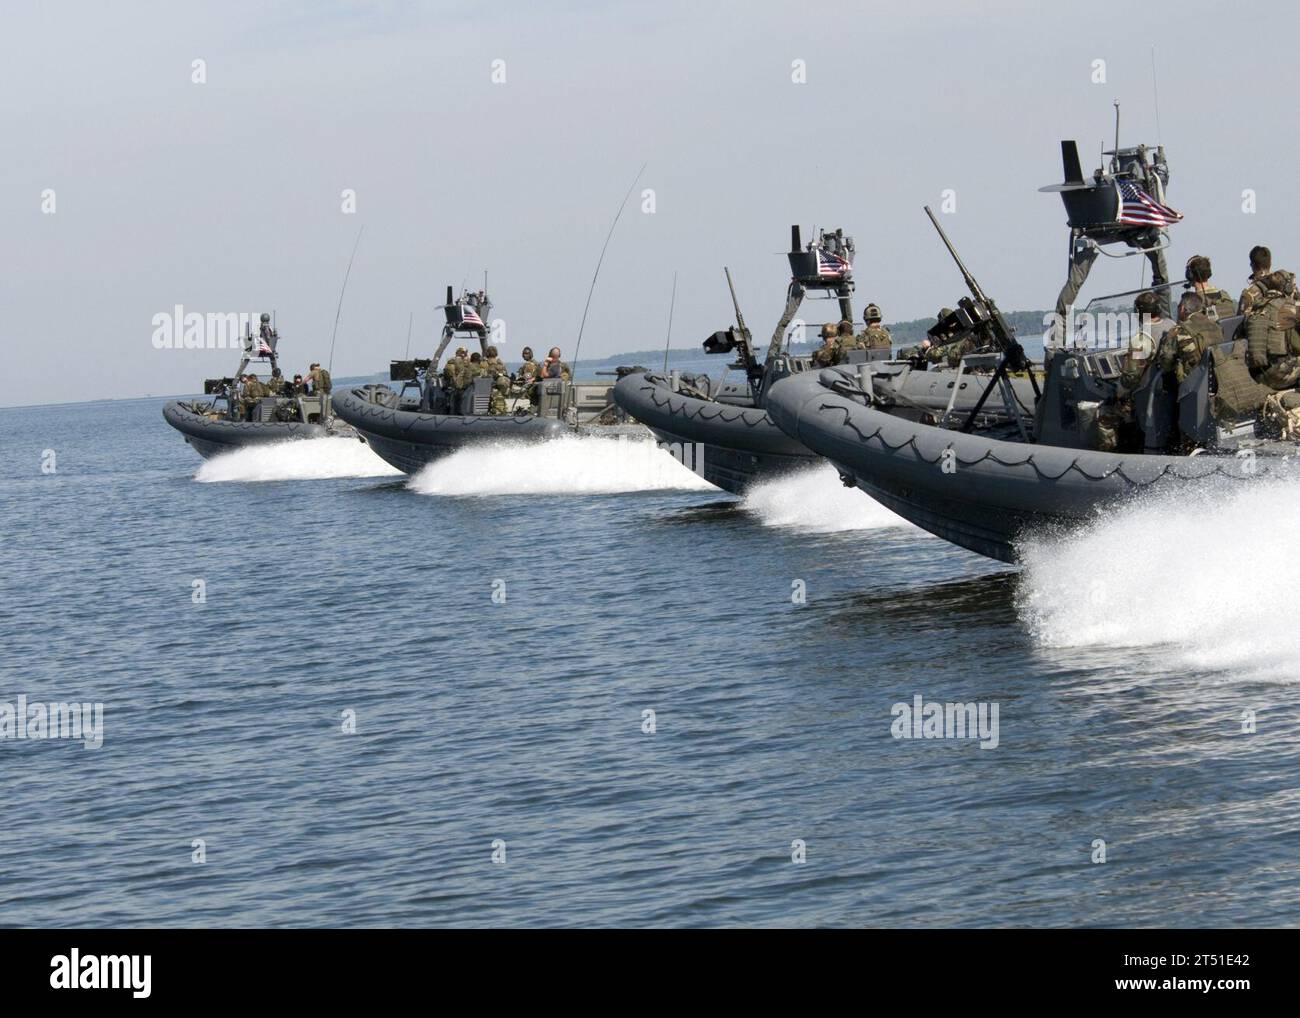 0809034500G-110 PINEY ISLAND, N.C. (Sept. 3, 2008) Naval Special Warfare 11-meter Rigid-hull Inflatable Boats (RIB) transit the Pamlico Sound to a live-fire training range near Piney Island. The Special Warfare Combatant-craft Crewmen (SWCC), who operate the 11-meter RHIBs, fired .50-caliber machine guns and MK-19 grenade launchers as part of a training exercise preparing for an upcoming deployment supporting the Global War on Terrorism. Navy Stock Photo